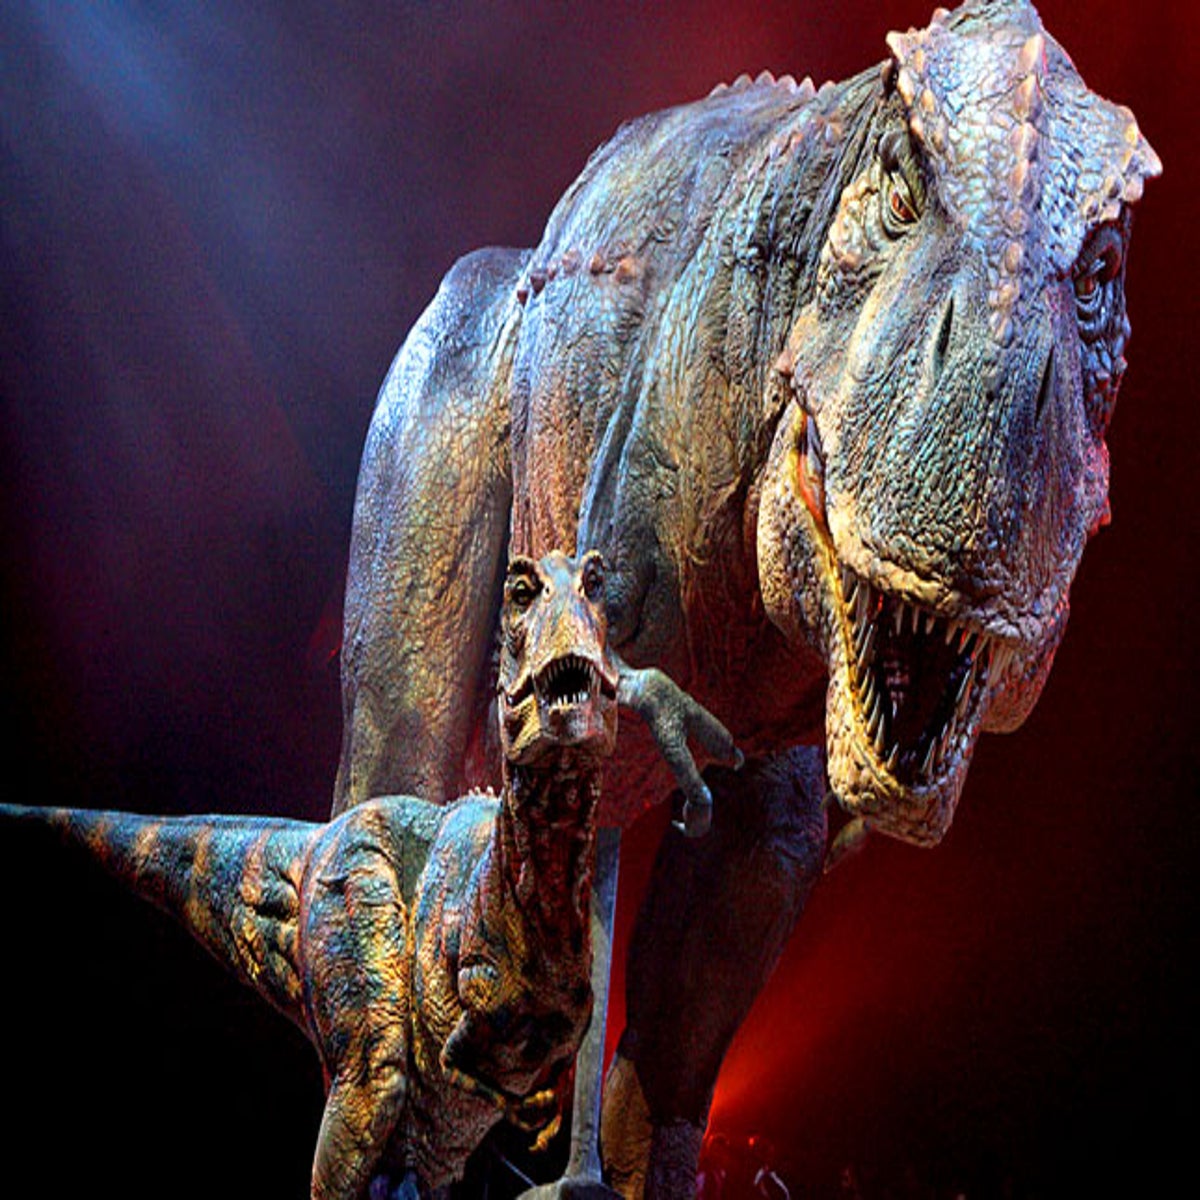 Jurassic Park a lie; T. rex couldn't run says latest research